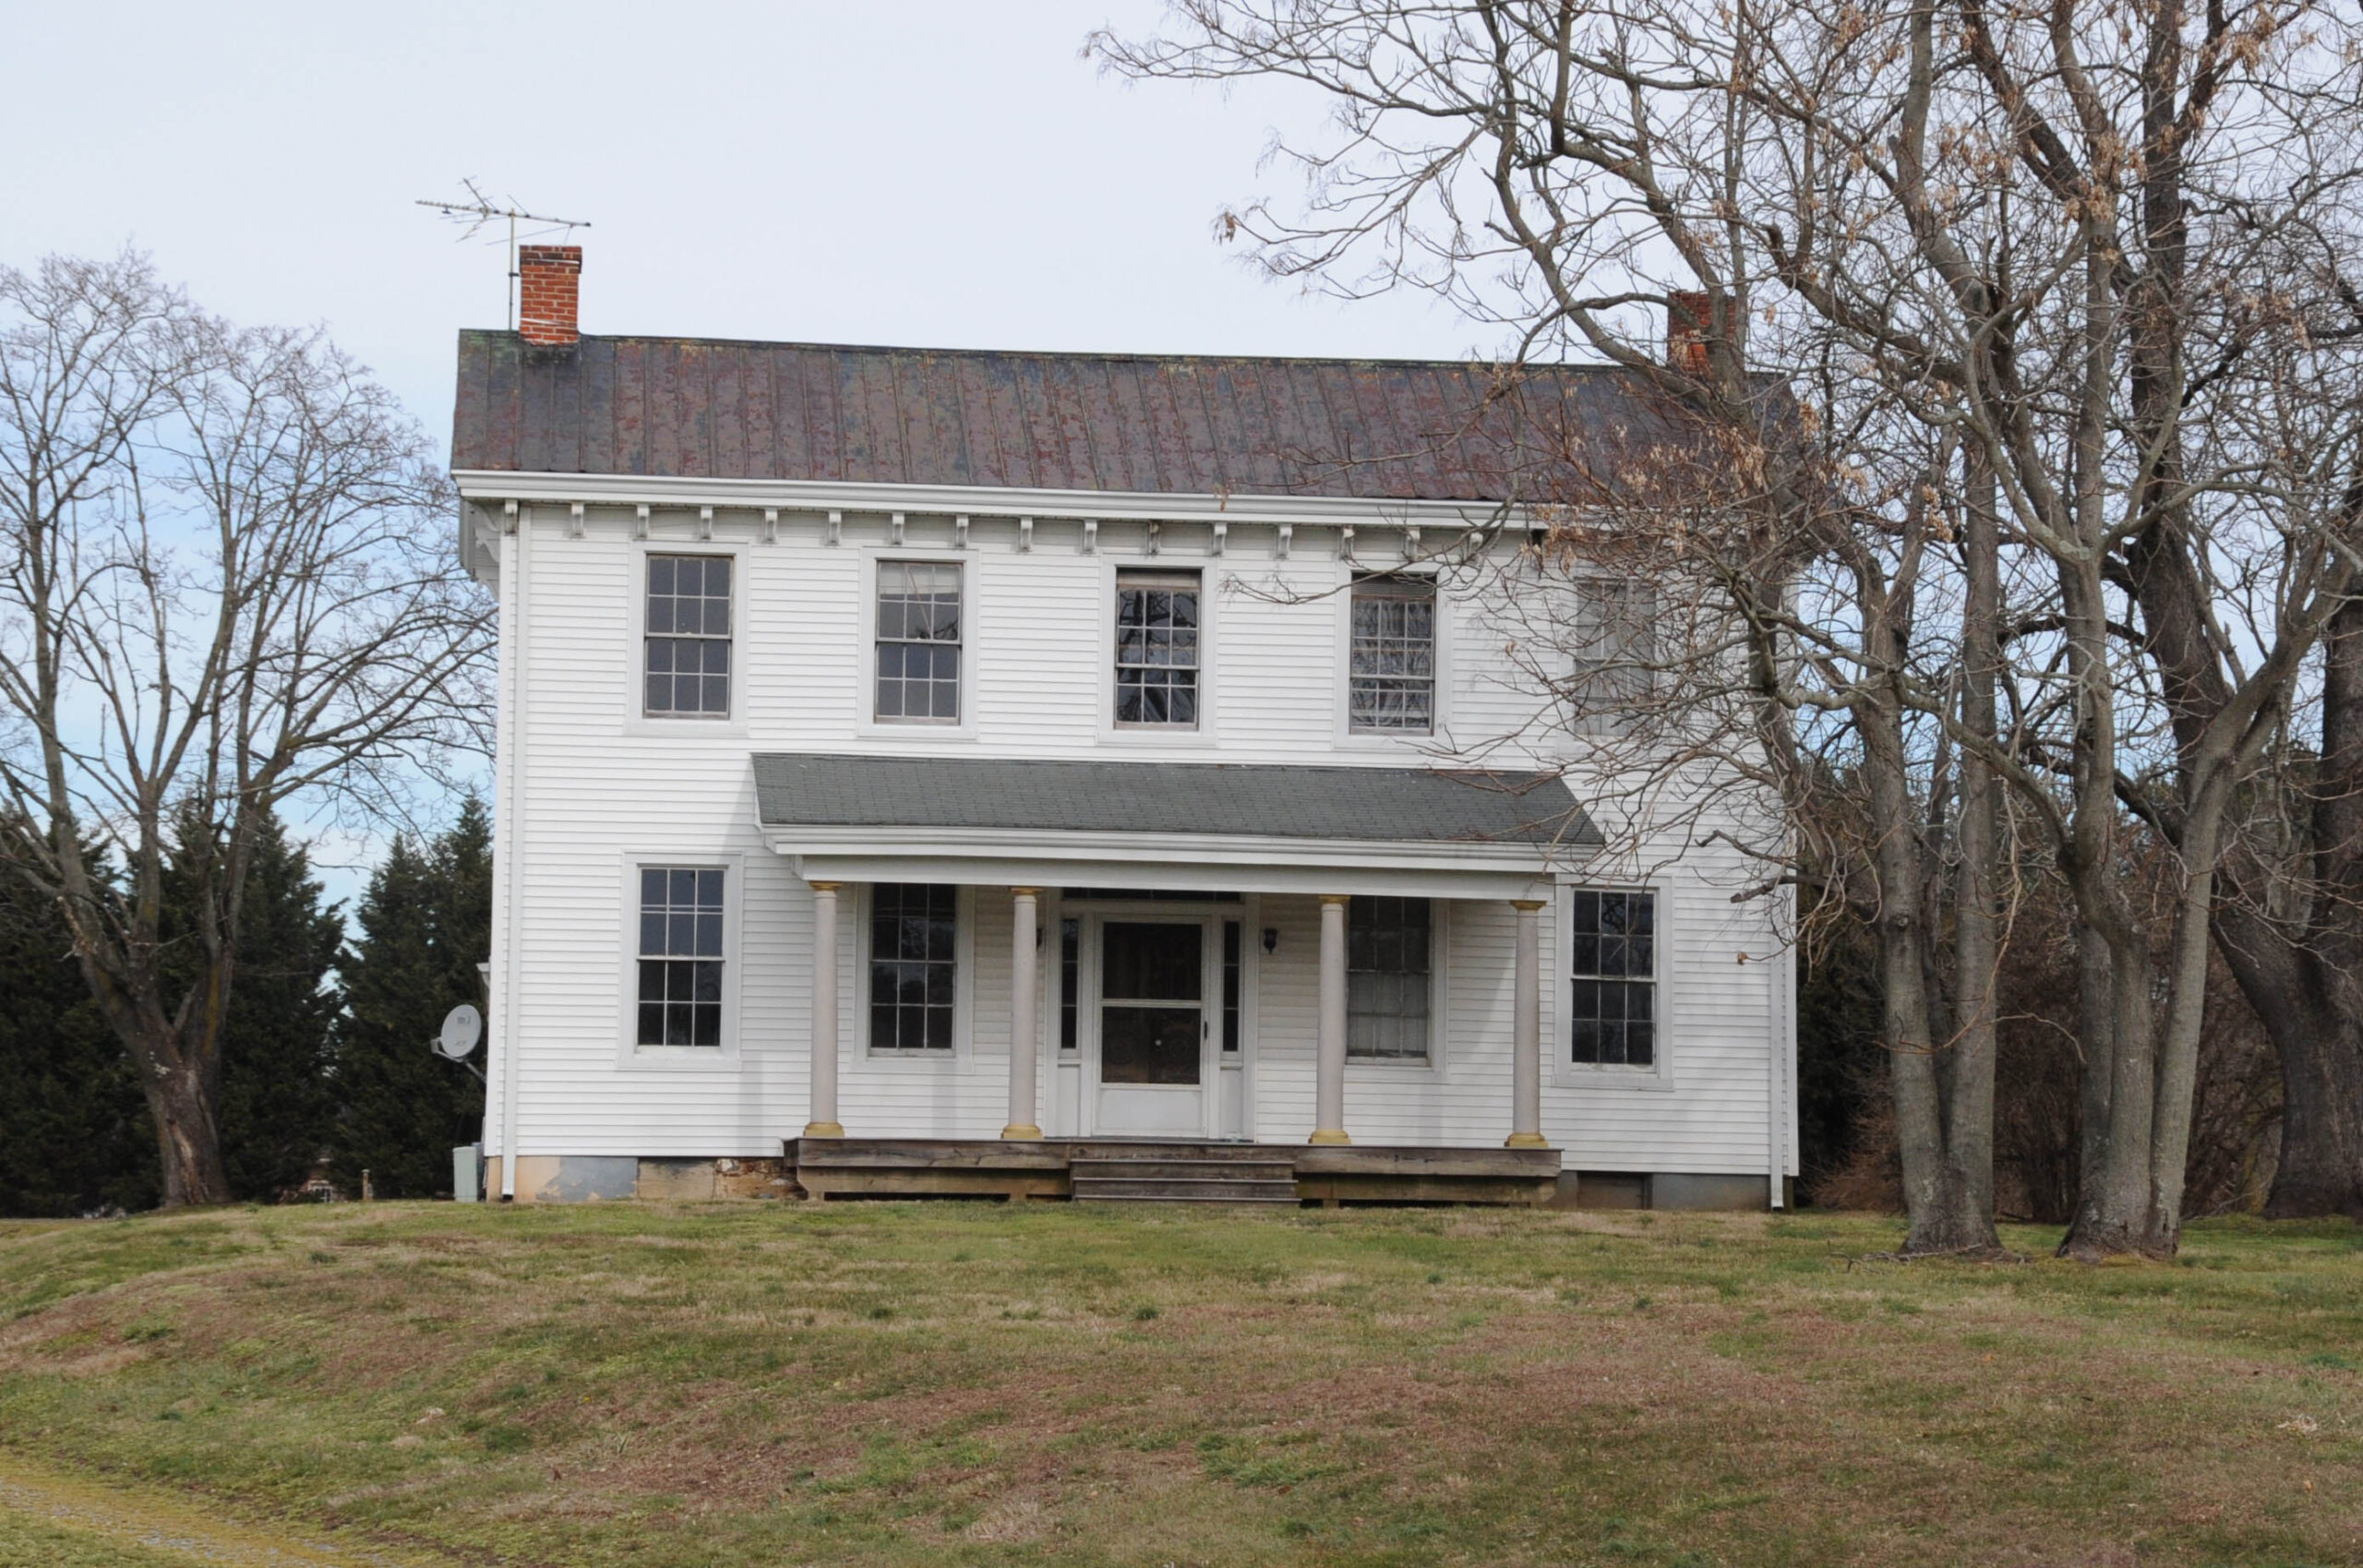 JERRYE & ROY KLOTZ, M.D., CC BY-SA 4.0 , via Wikimedia Commons A historical white house known as White Hall located in Bear, Northern New Castle County, Delaware. The house features a classic architectural style with a simple rectangular shape, multiple windows, a central front door, and a small porch supported by four columns. The roof has a weathered appearance, and the surrounding landscape includes bare trees, suggesting a winter season. The house stands on a slightly elevated grassy area.